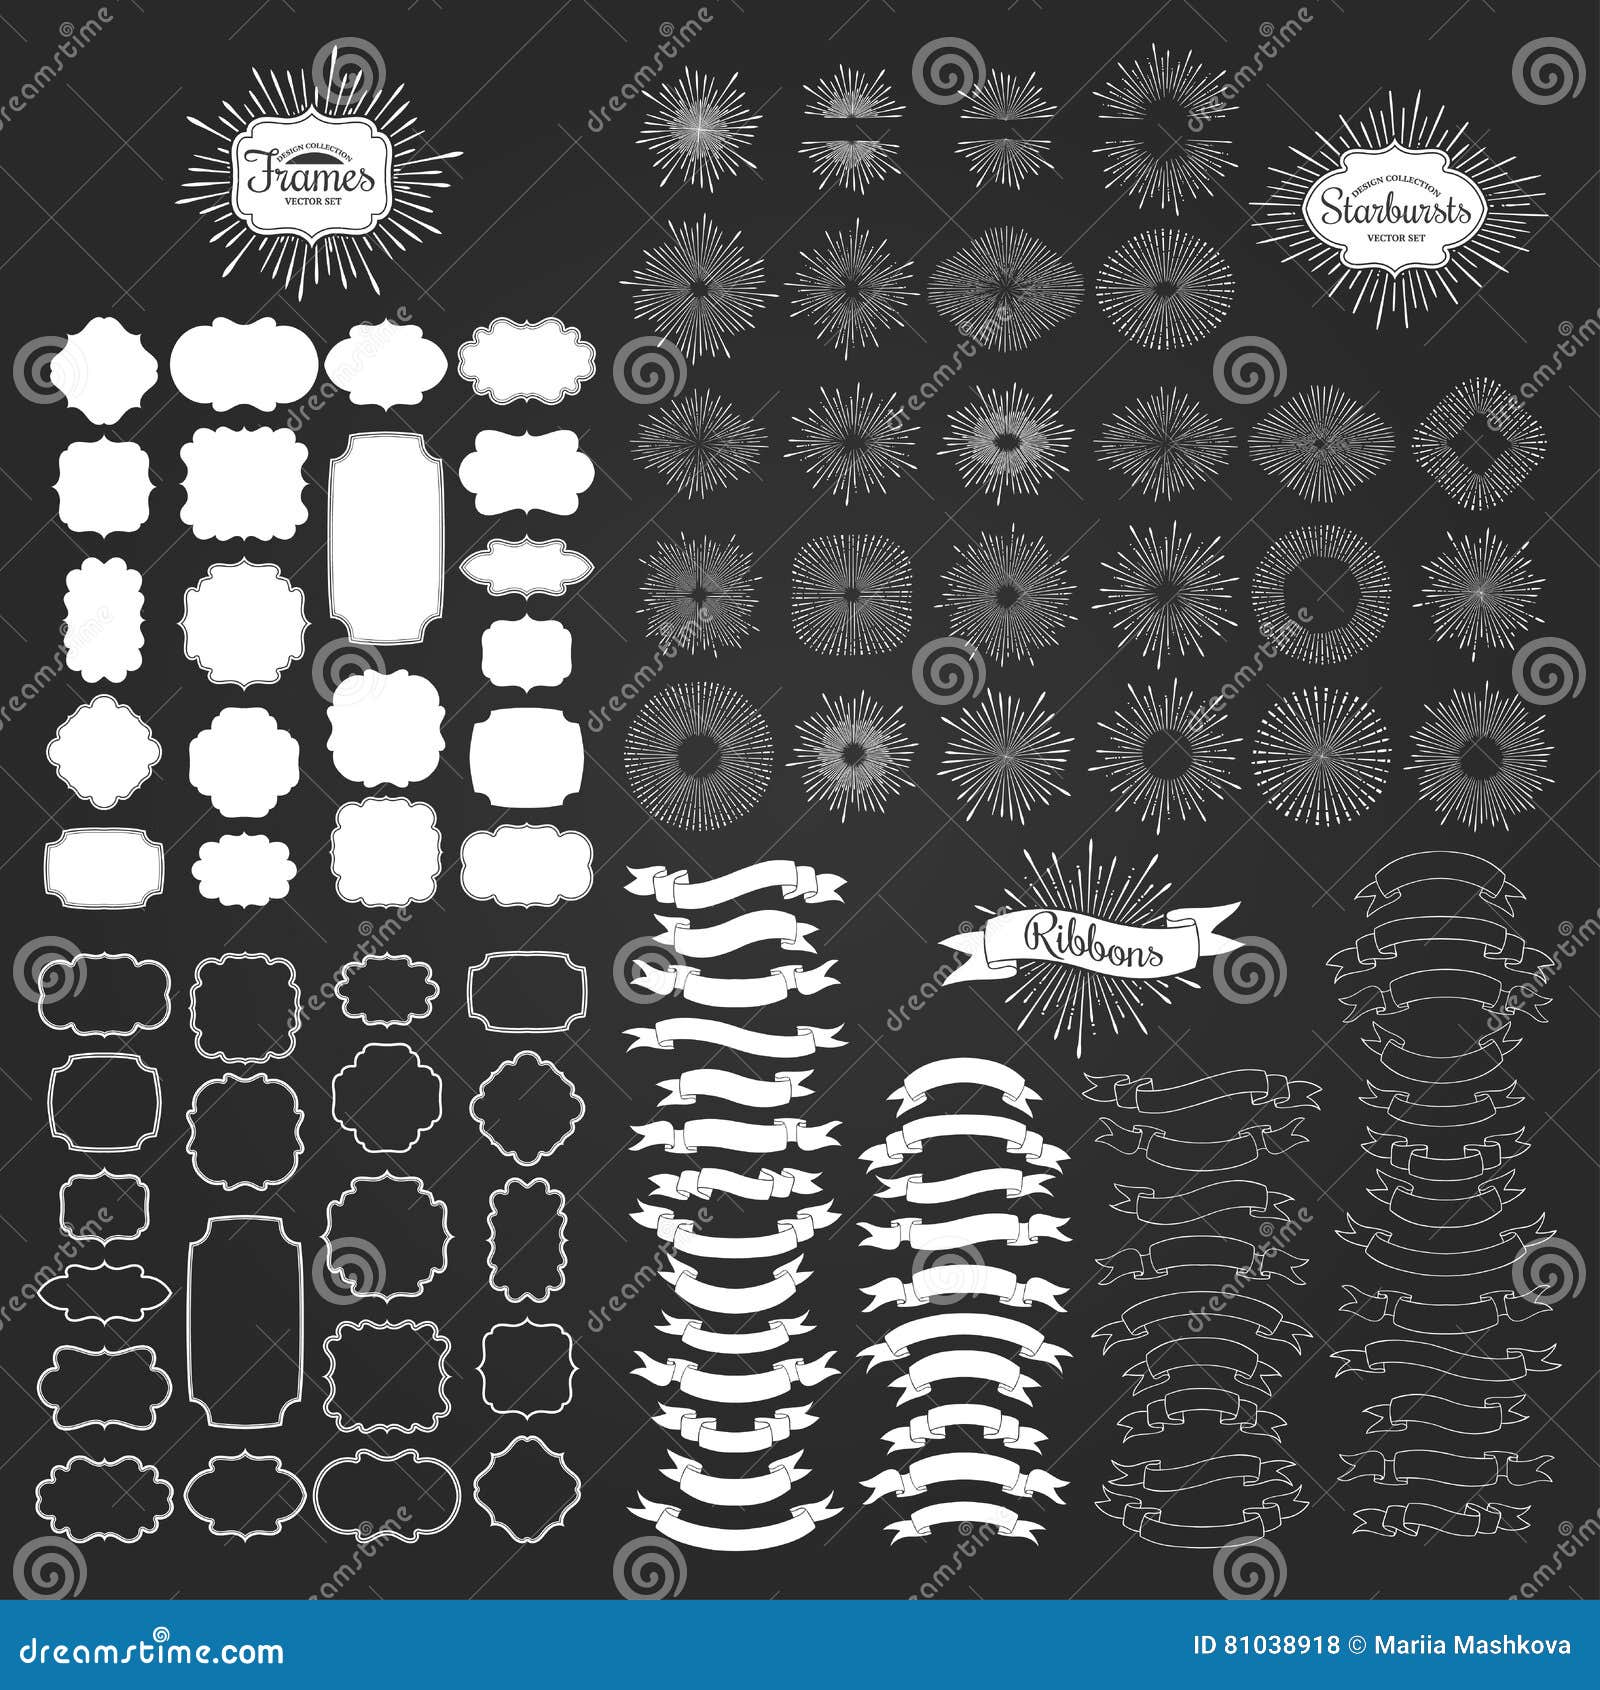 Starbursts, Frames and Ribbons. Stock Vector - Illustration of retro ...